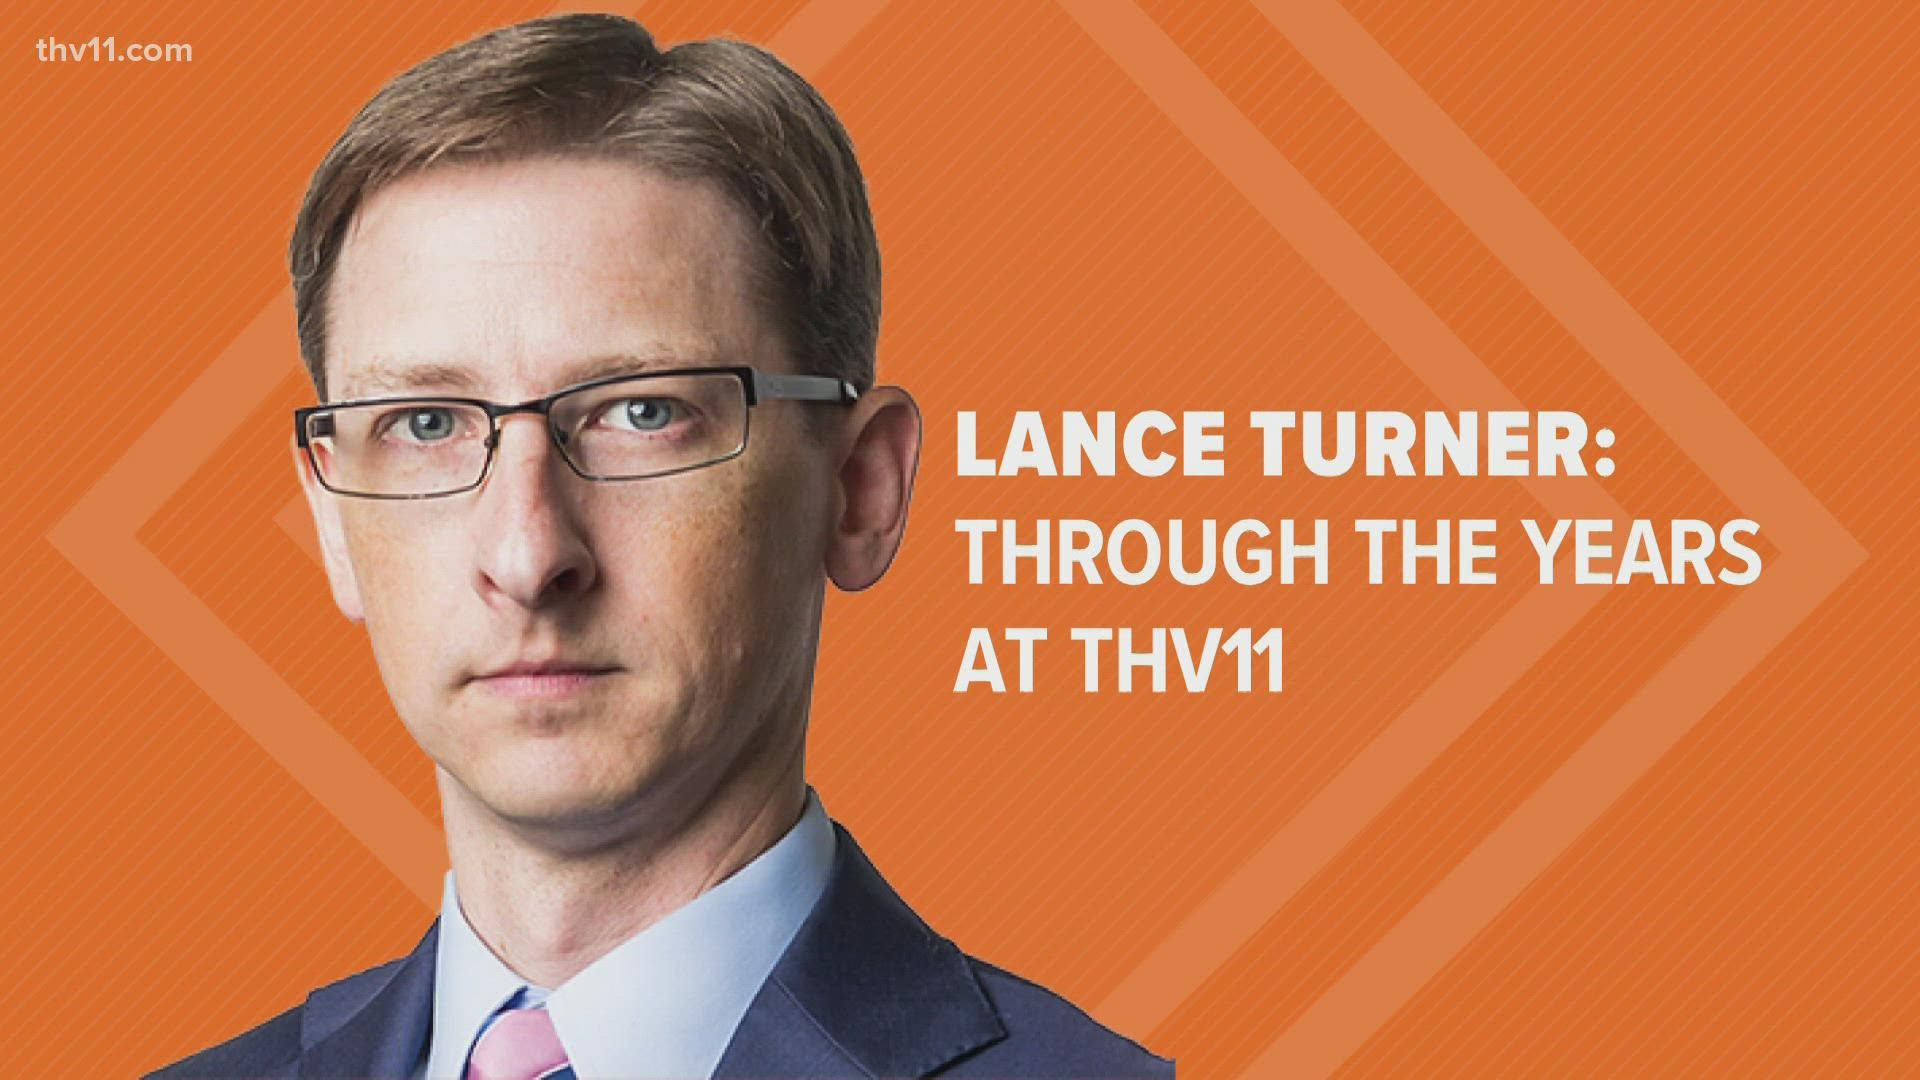 Cyber Monday isn't the only noteworthy event happening today... it's Lance Turner's birthday!